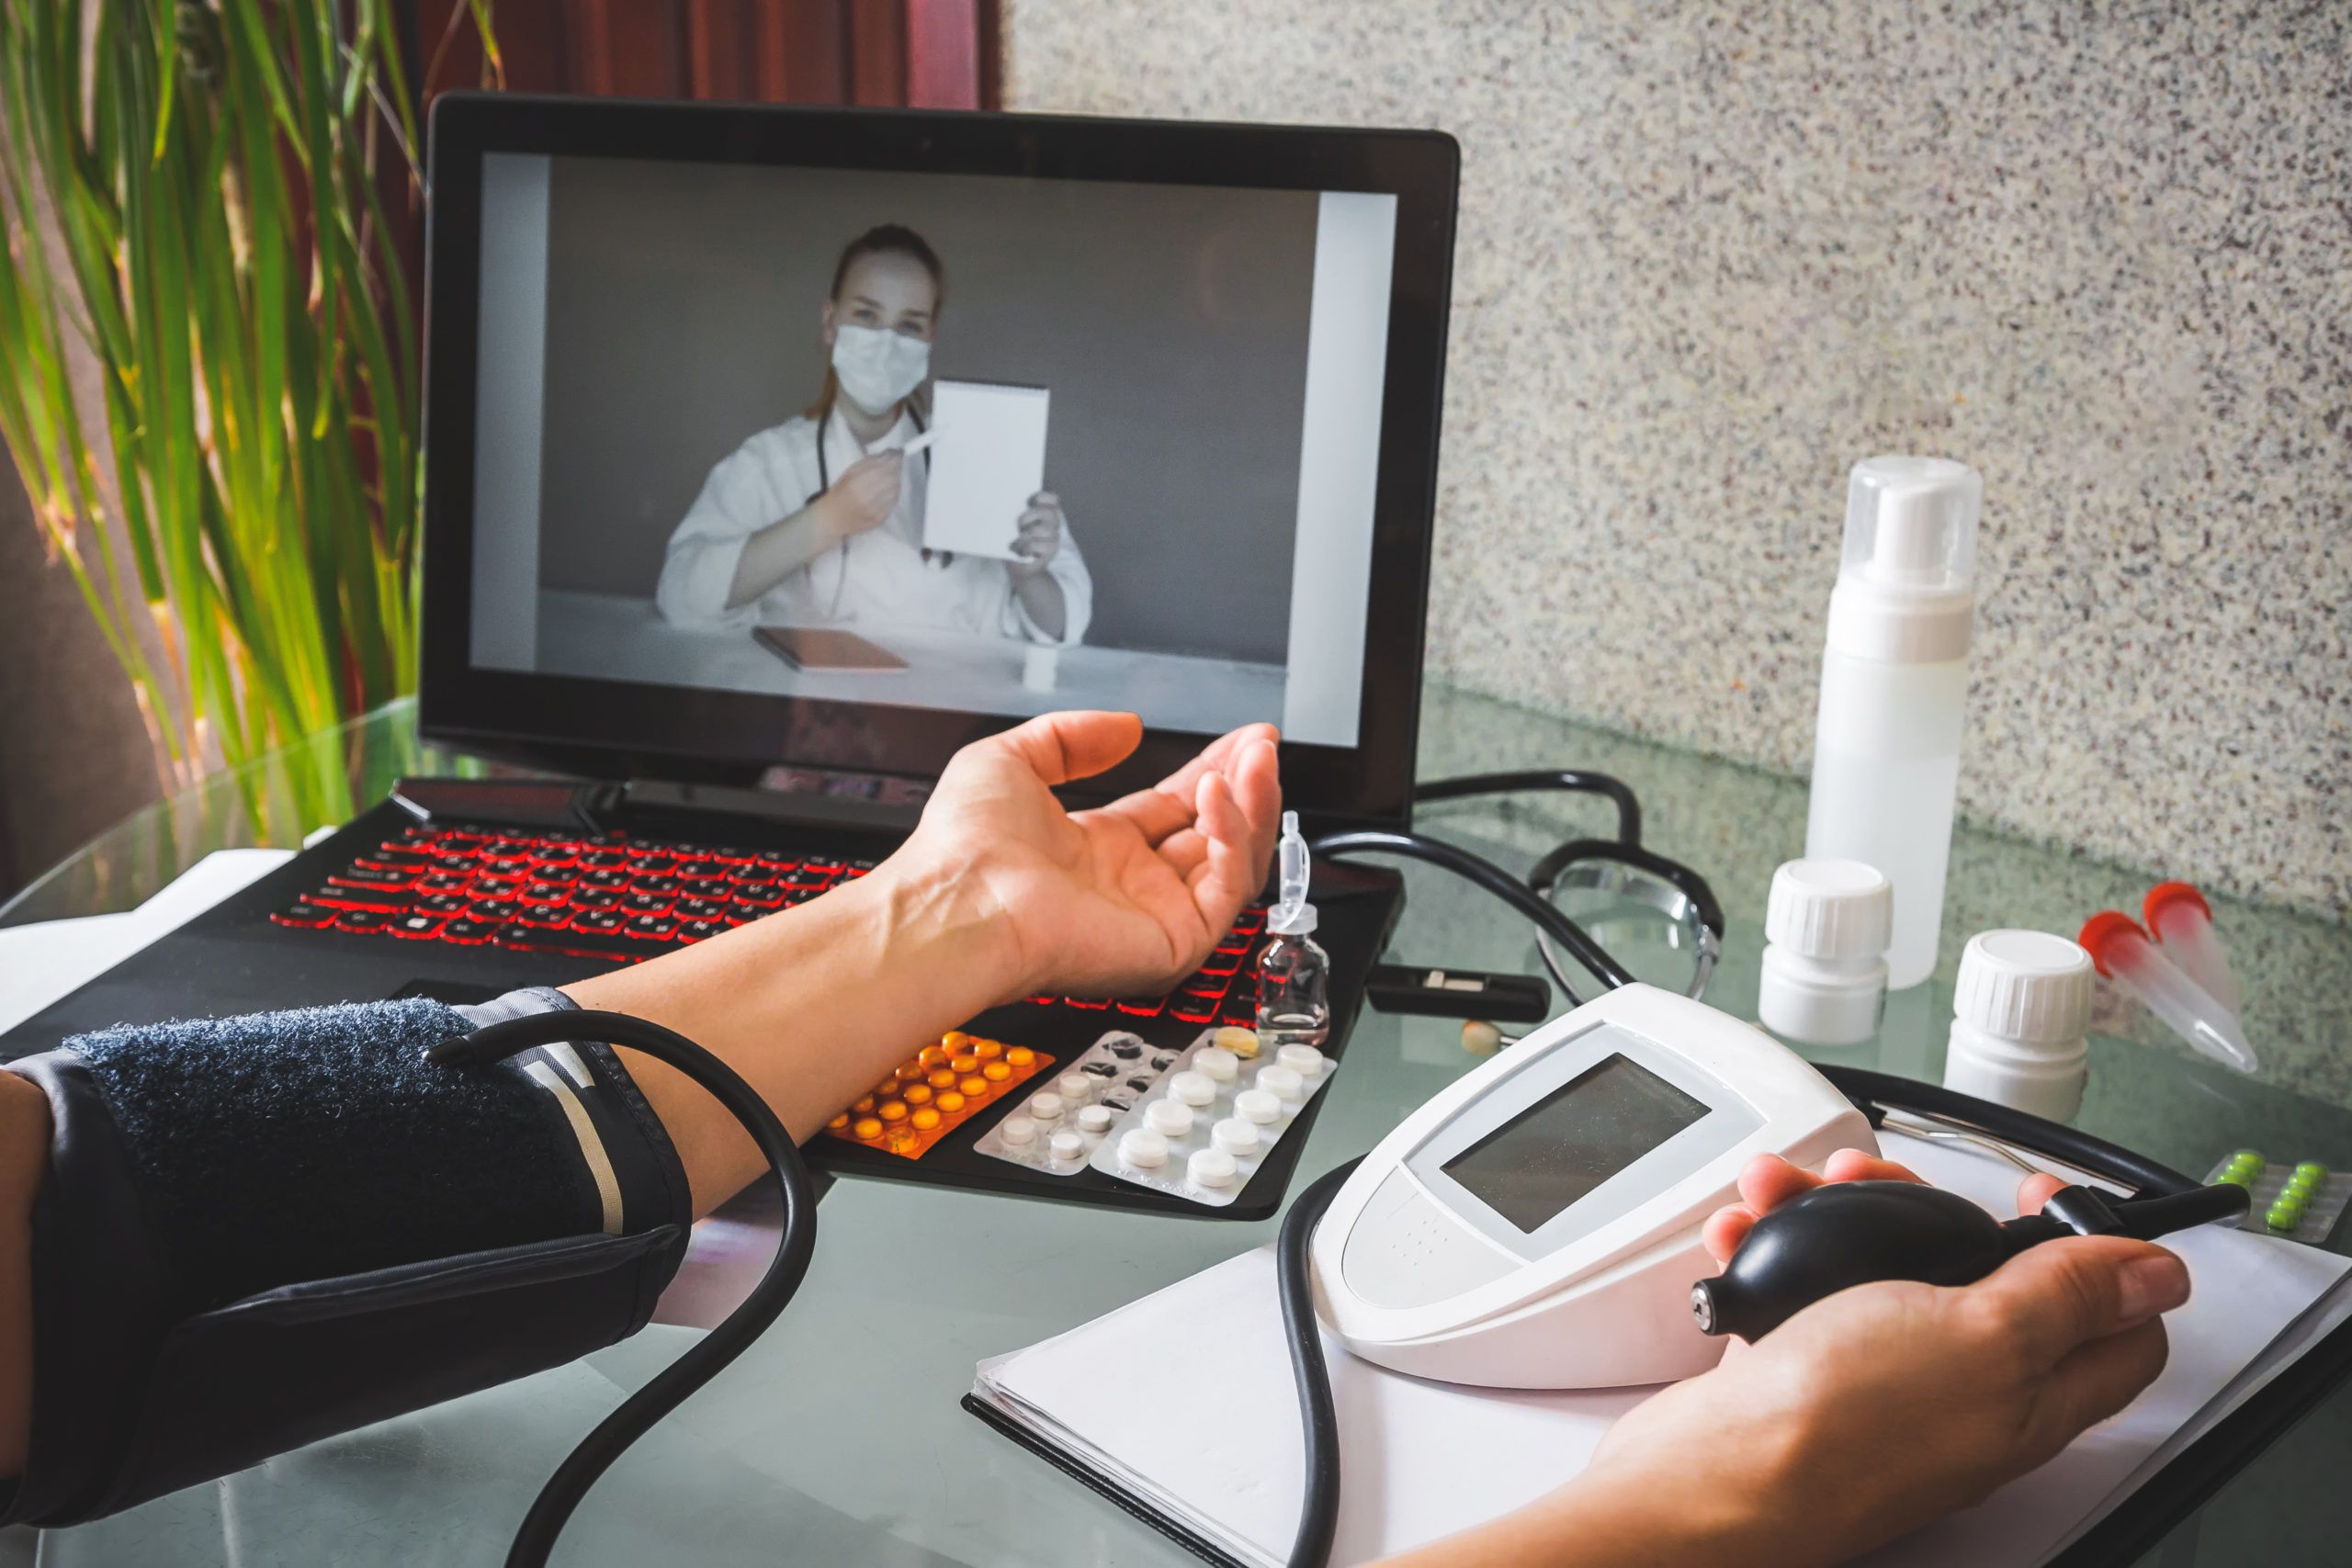 NP-Monitored Remote Patient Monitoring Feasible in Vulnerable Patients